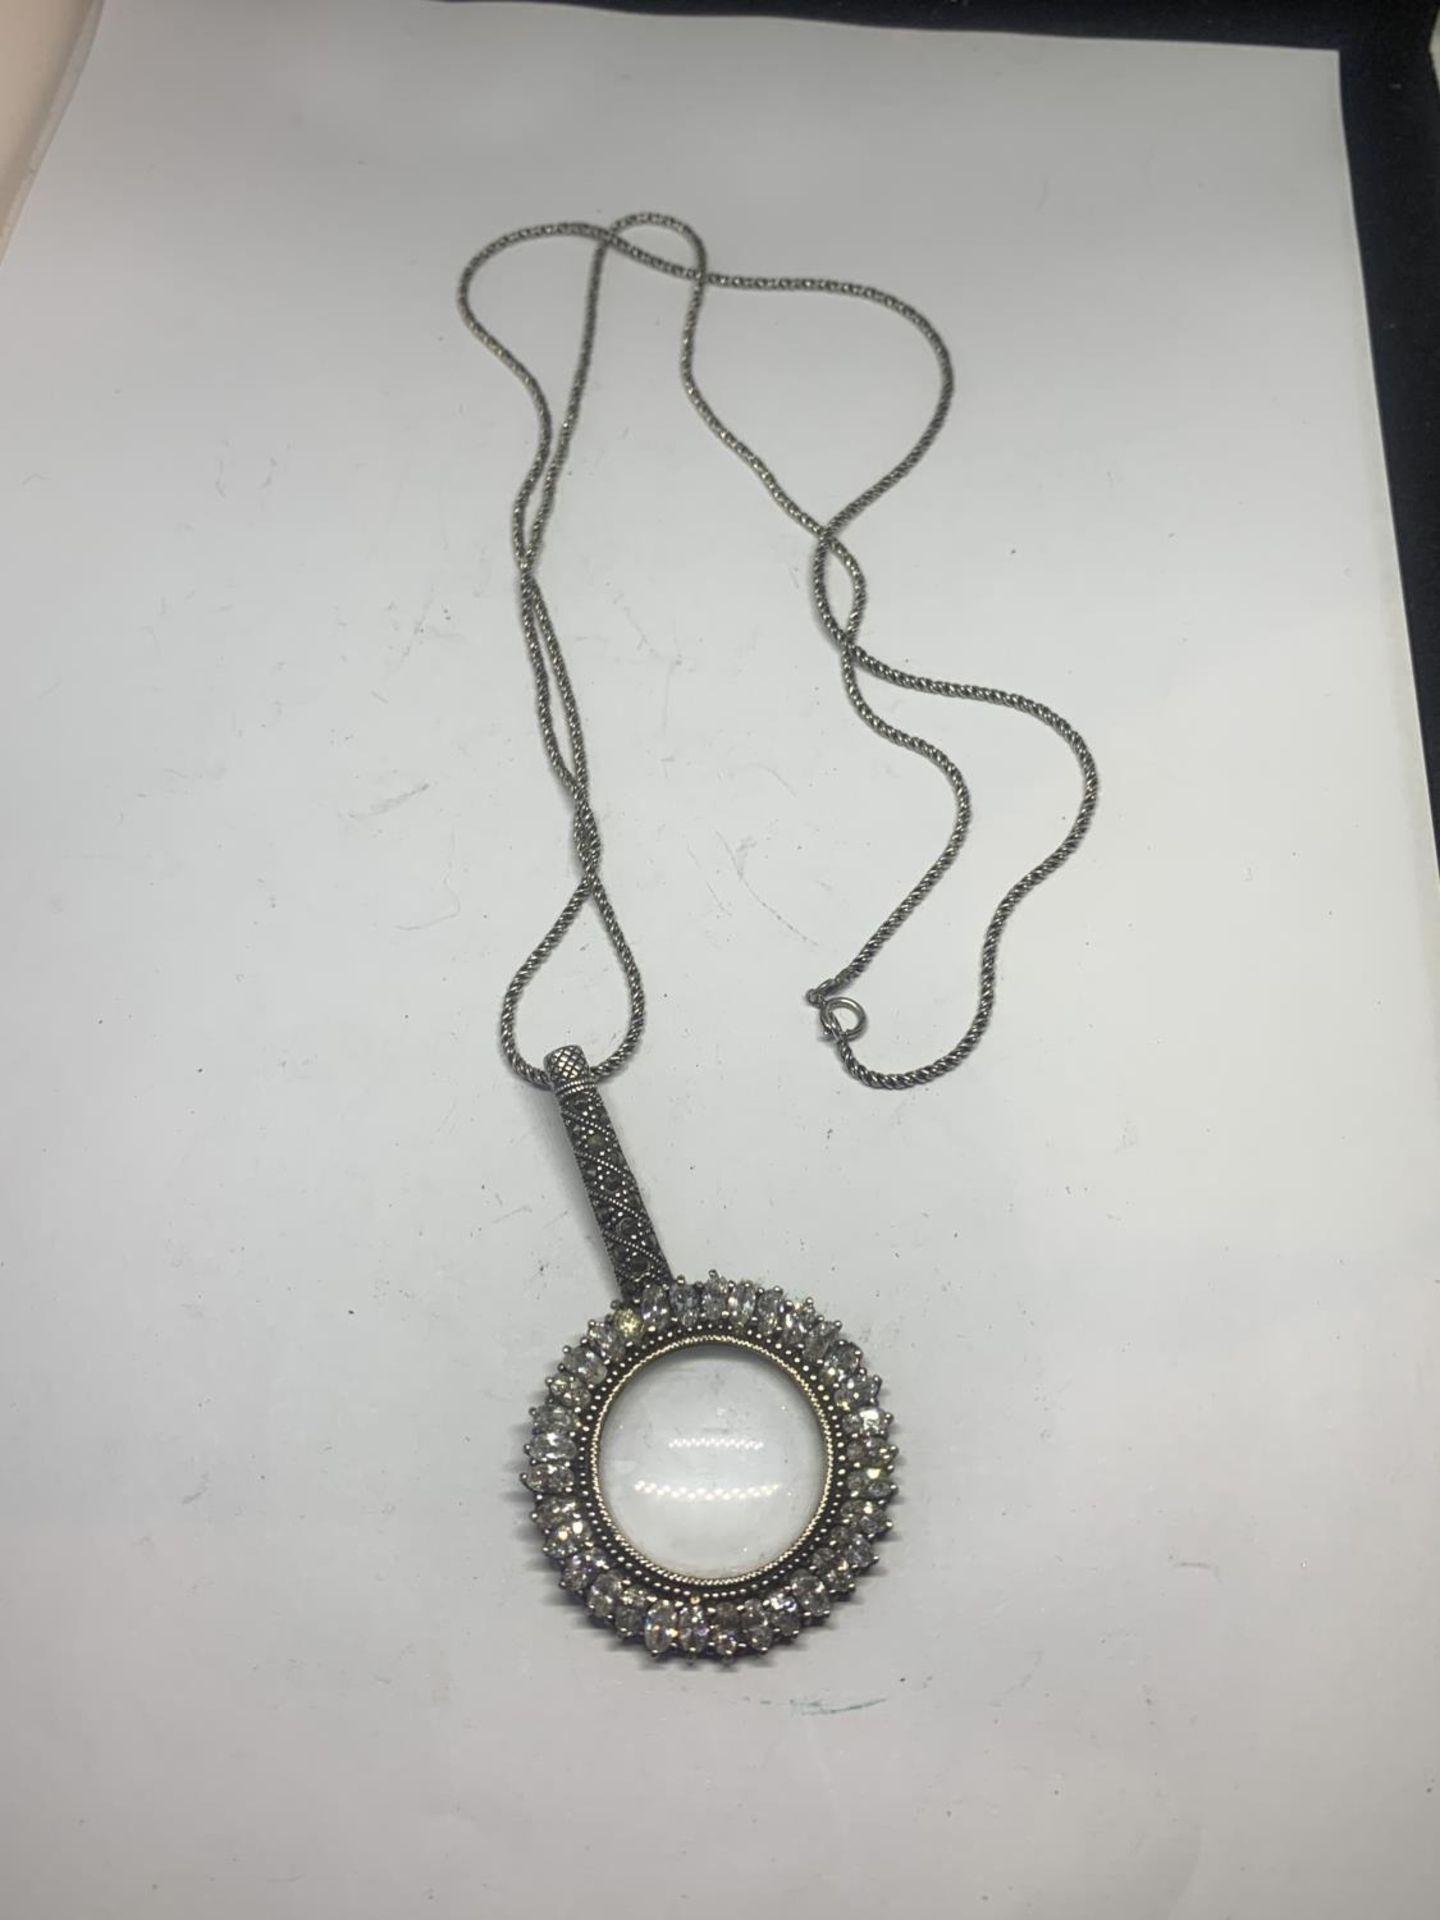 AN ORNATE SILVER MAGNIFYING GLASS ON A CHAIN WITH A PRESENTATION BOX